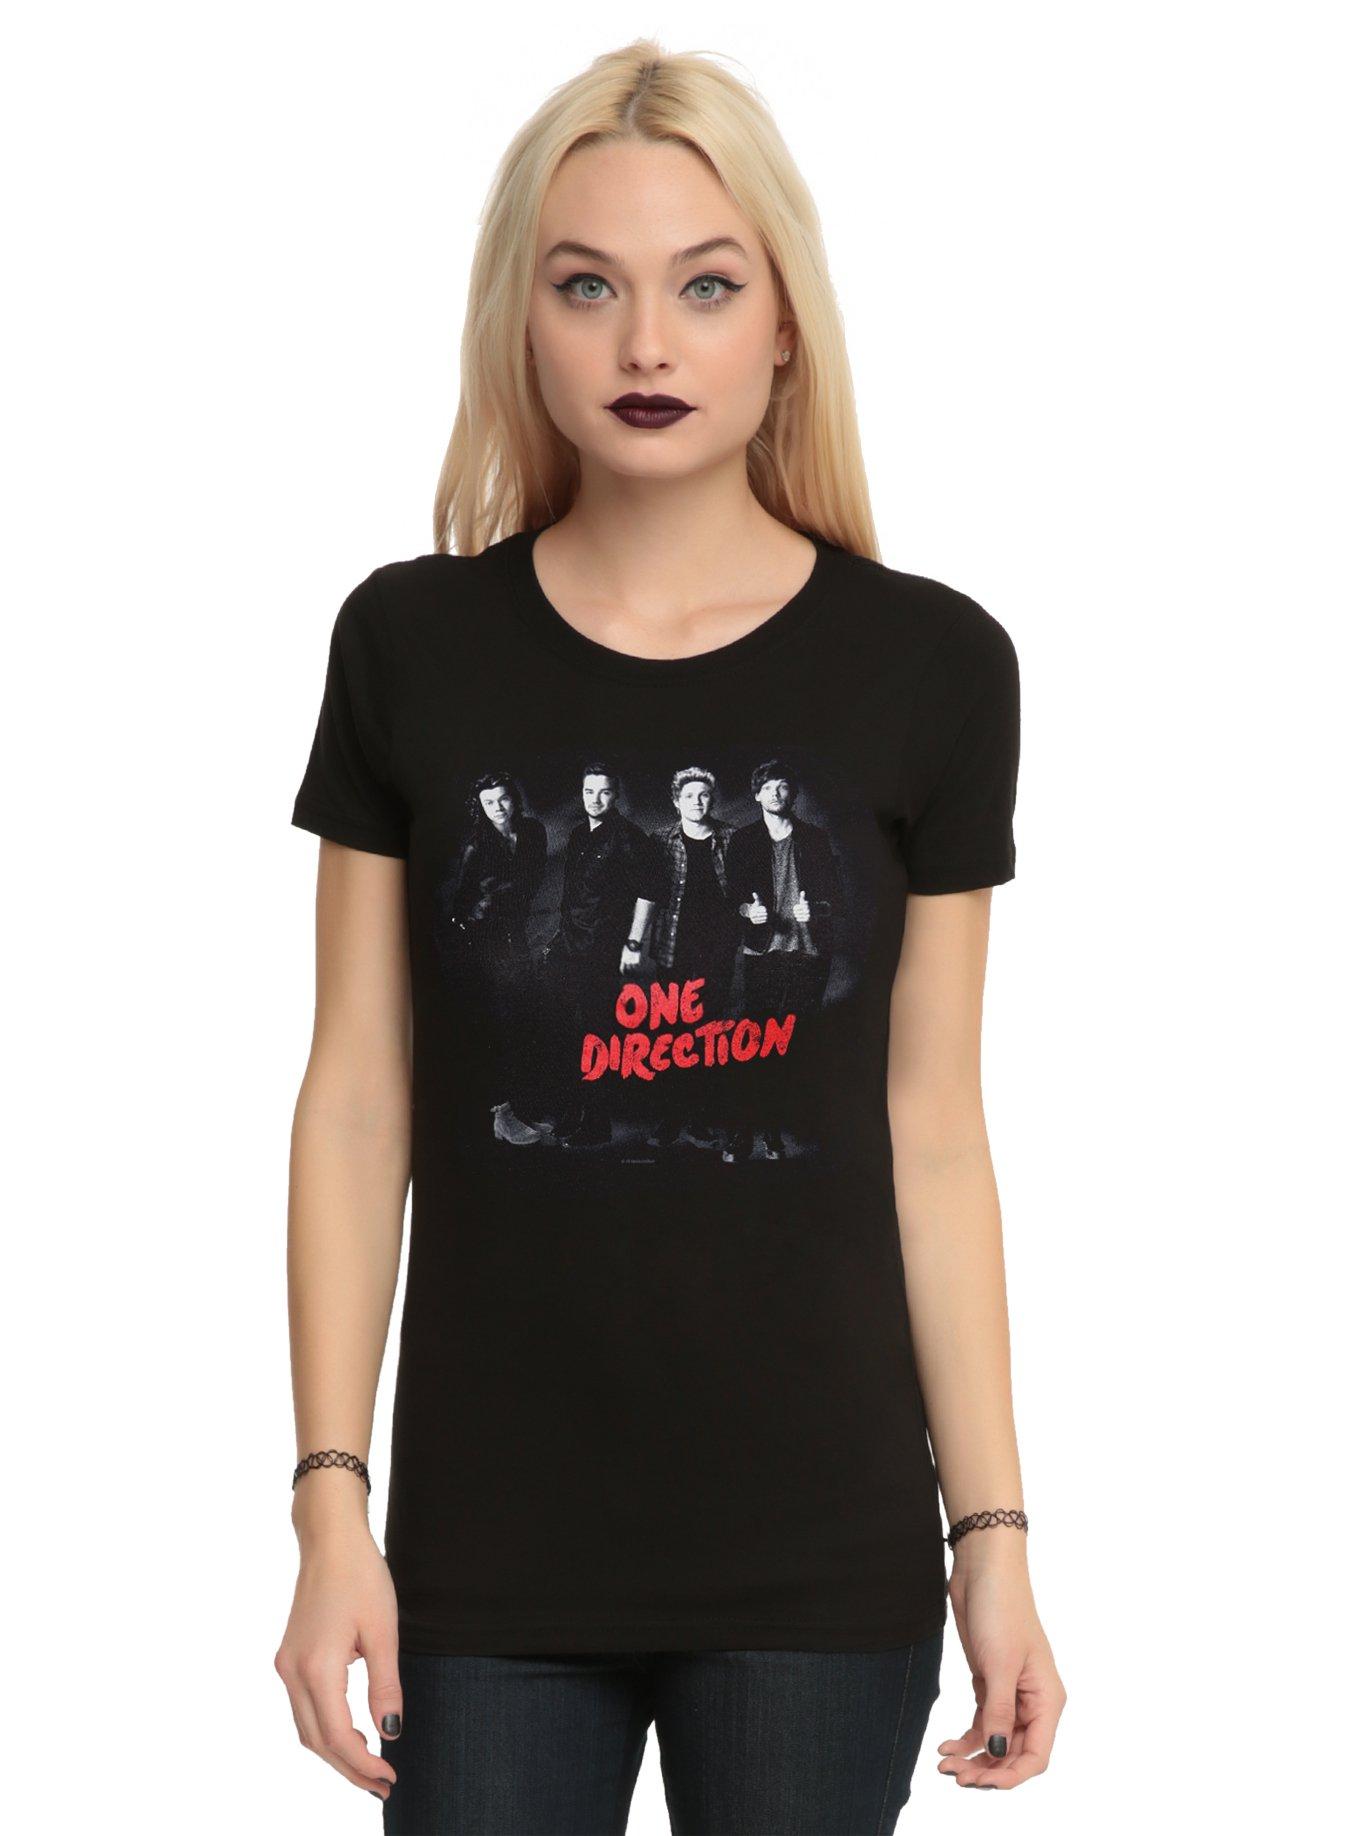 One Direction Standing Girls T-Shirt | Hot Topic